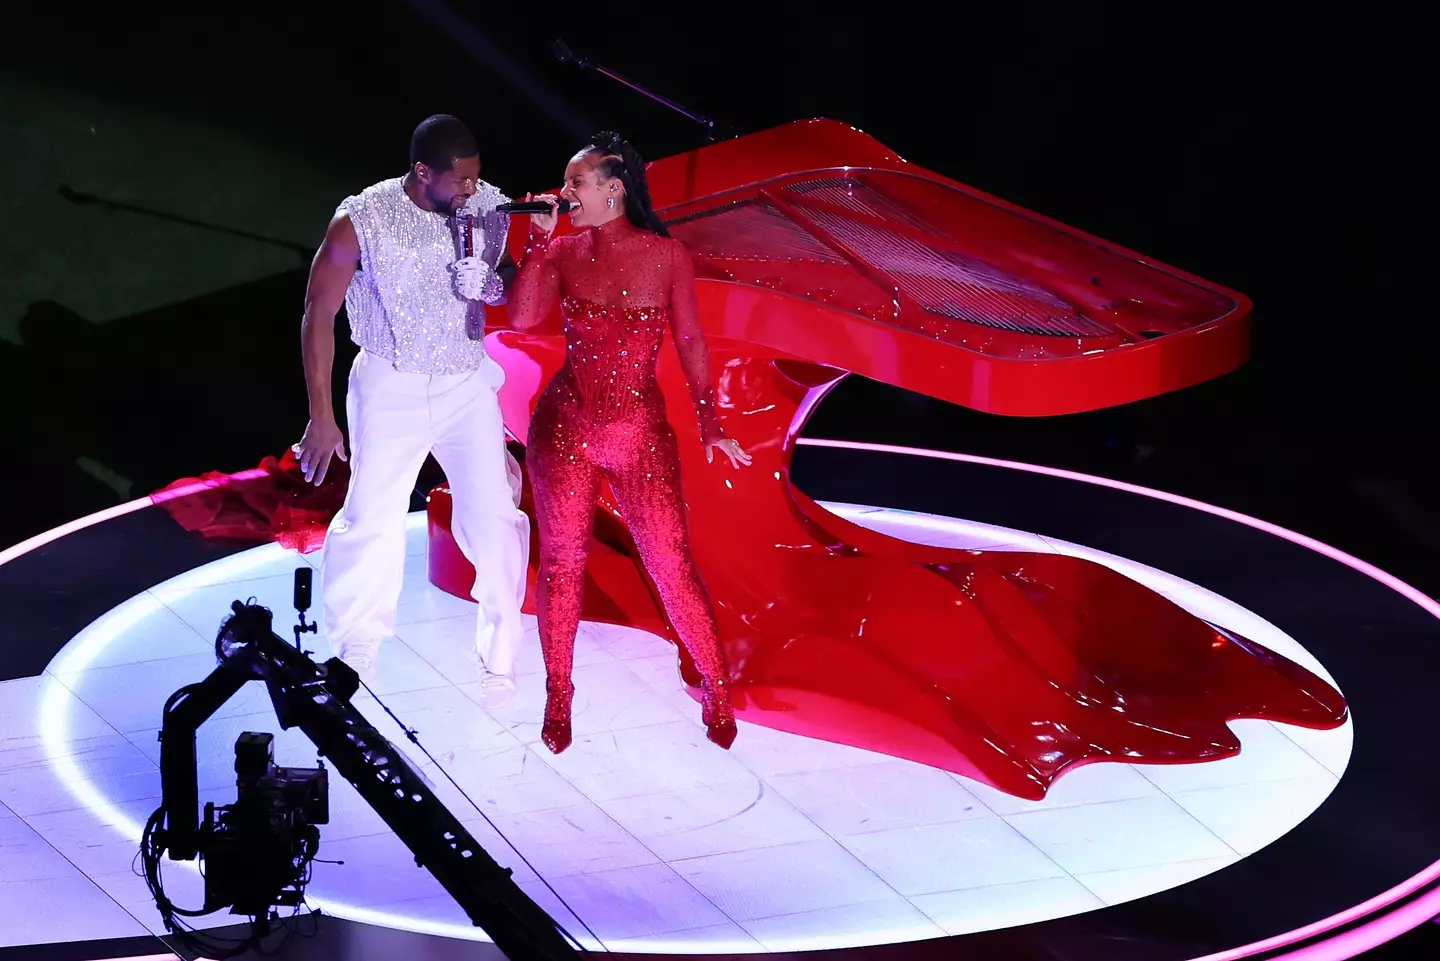 Alicia Keys joined Usher for the Super Bowl halftime show.